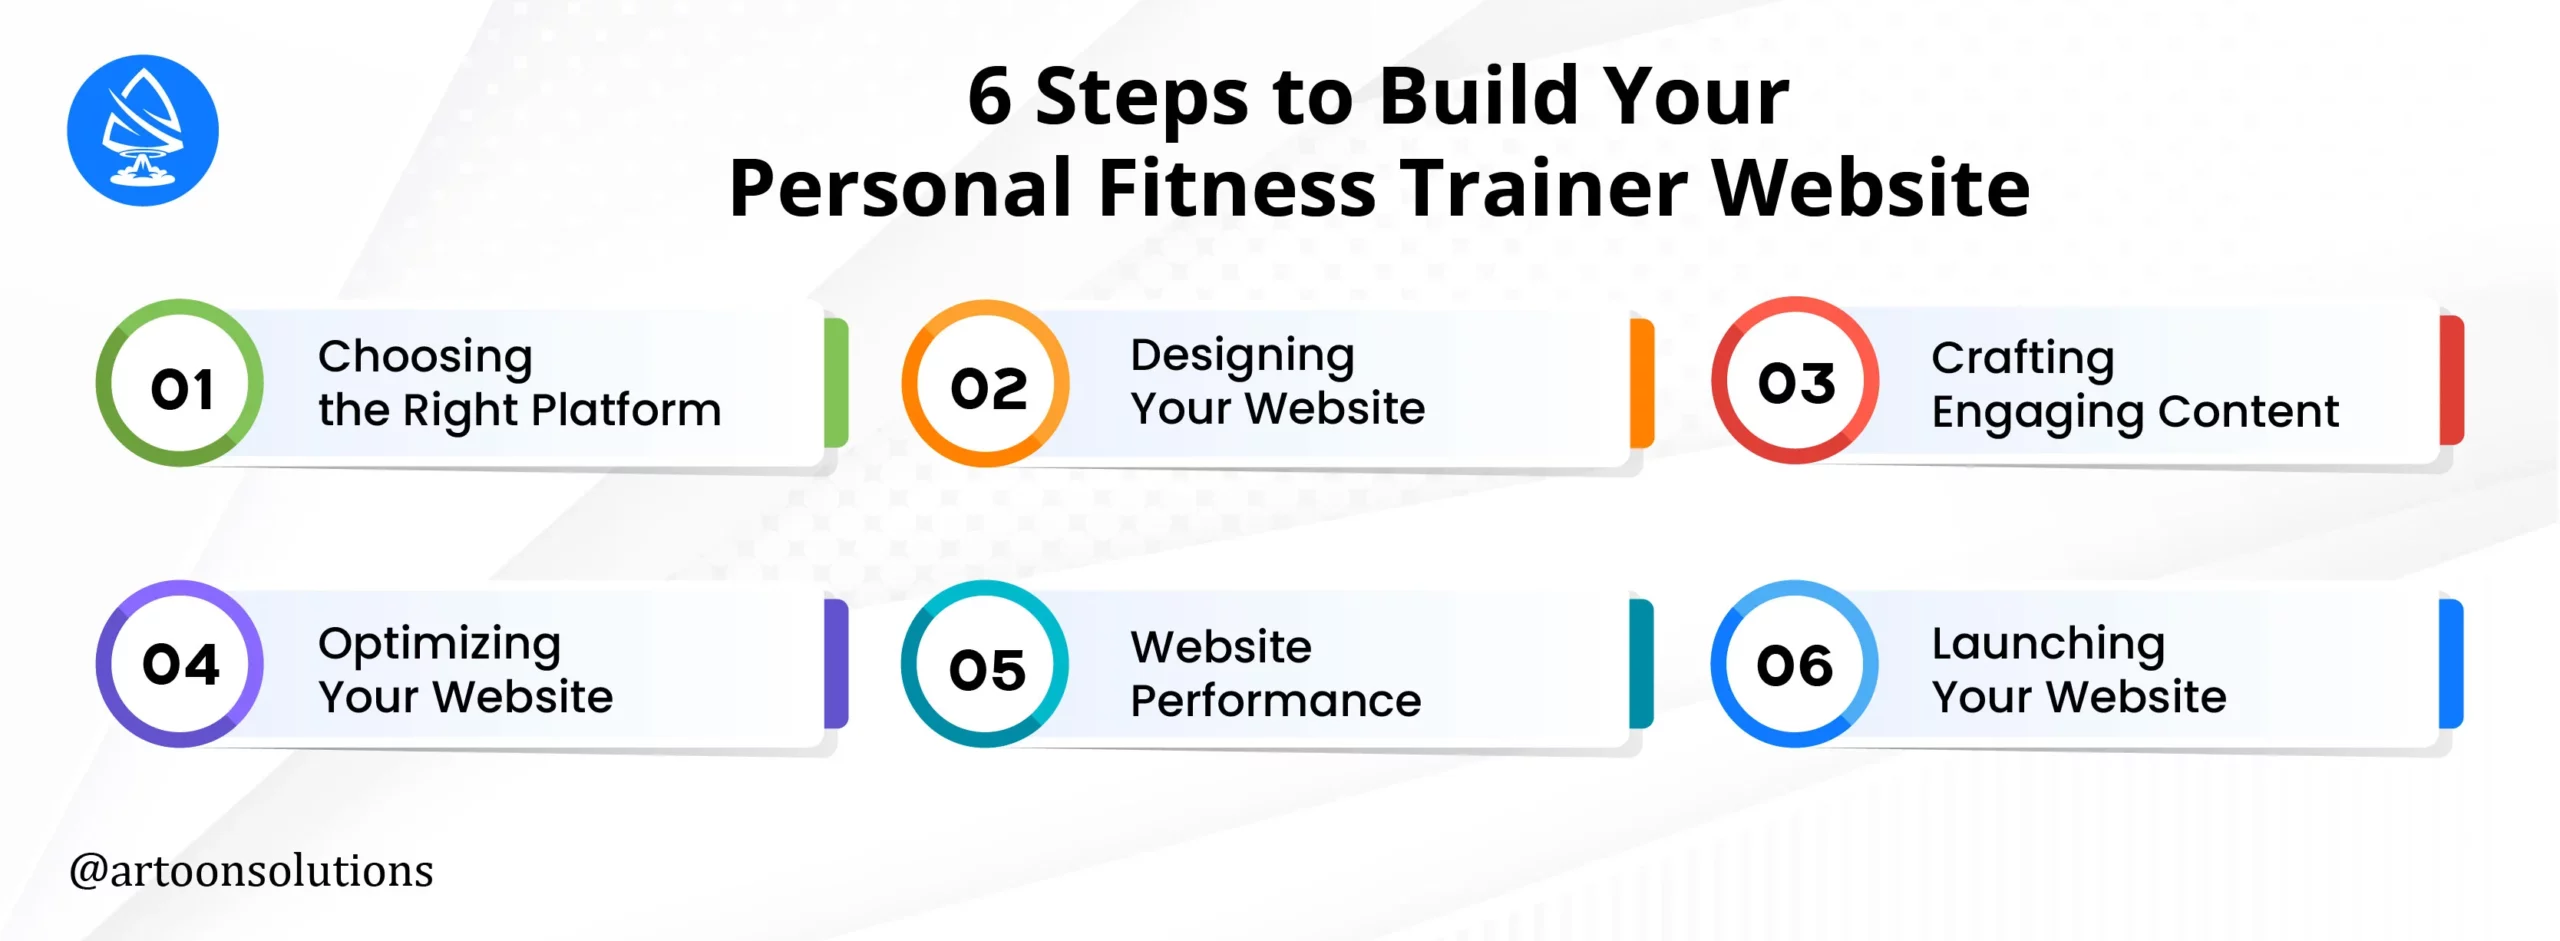 6 Steps to Build Your Personal Fitness Trainer Website